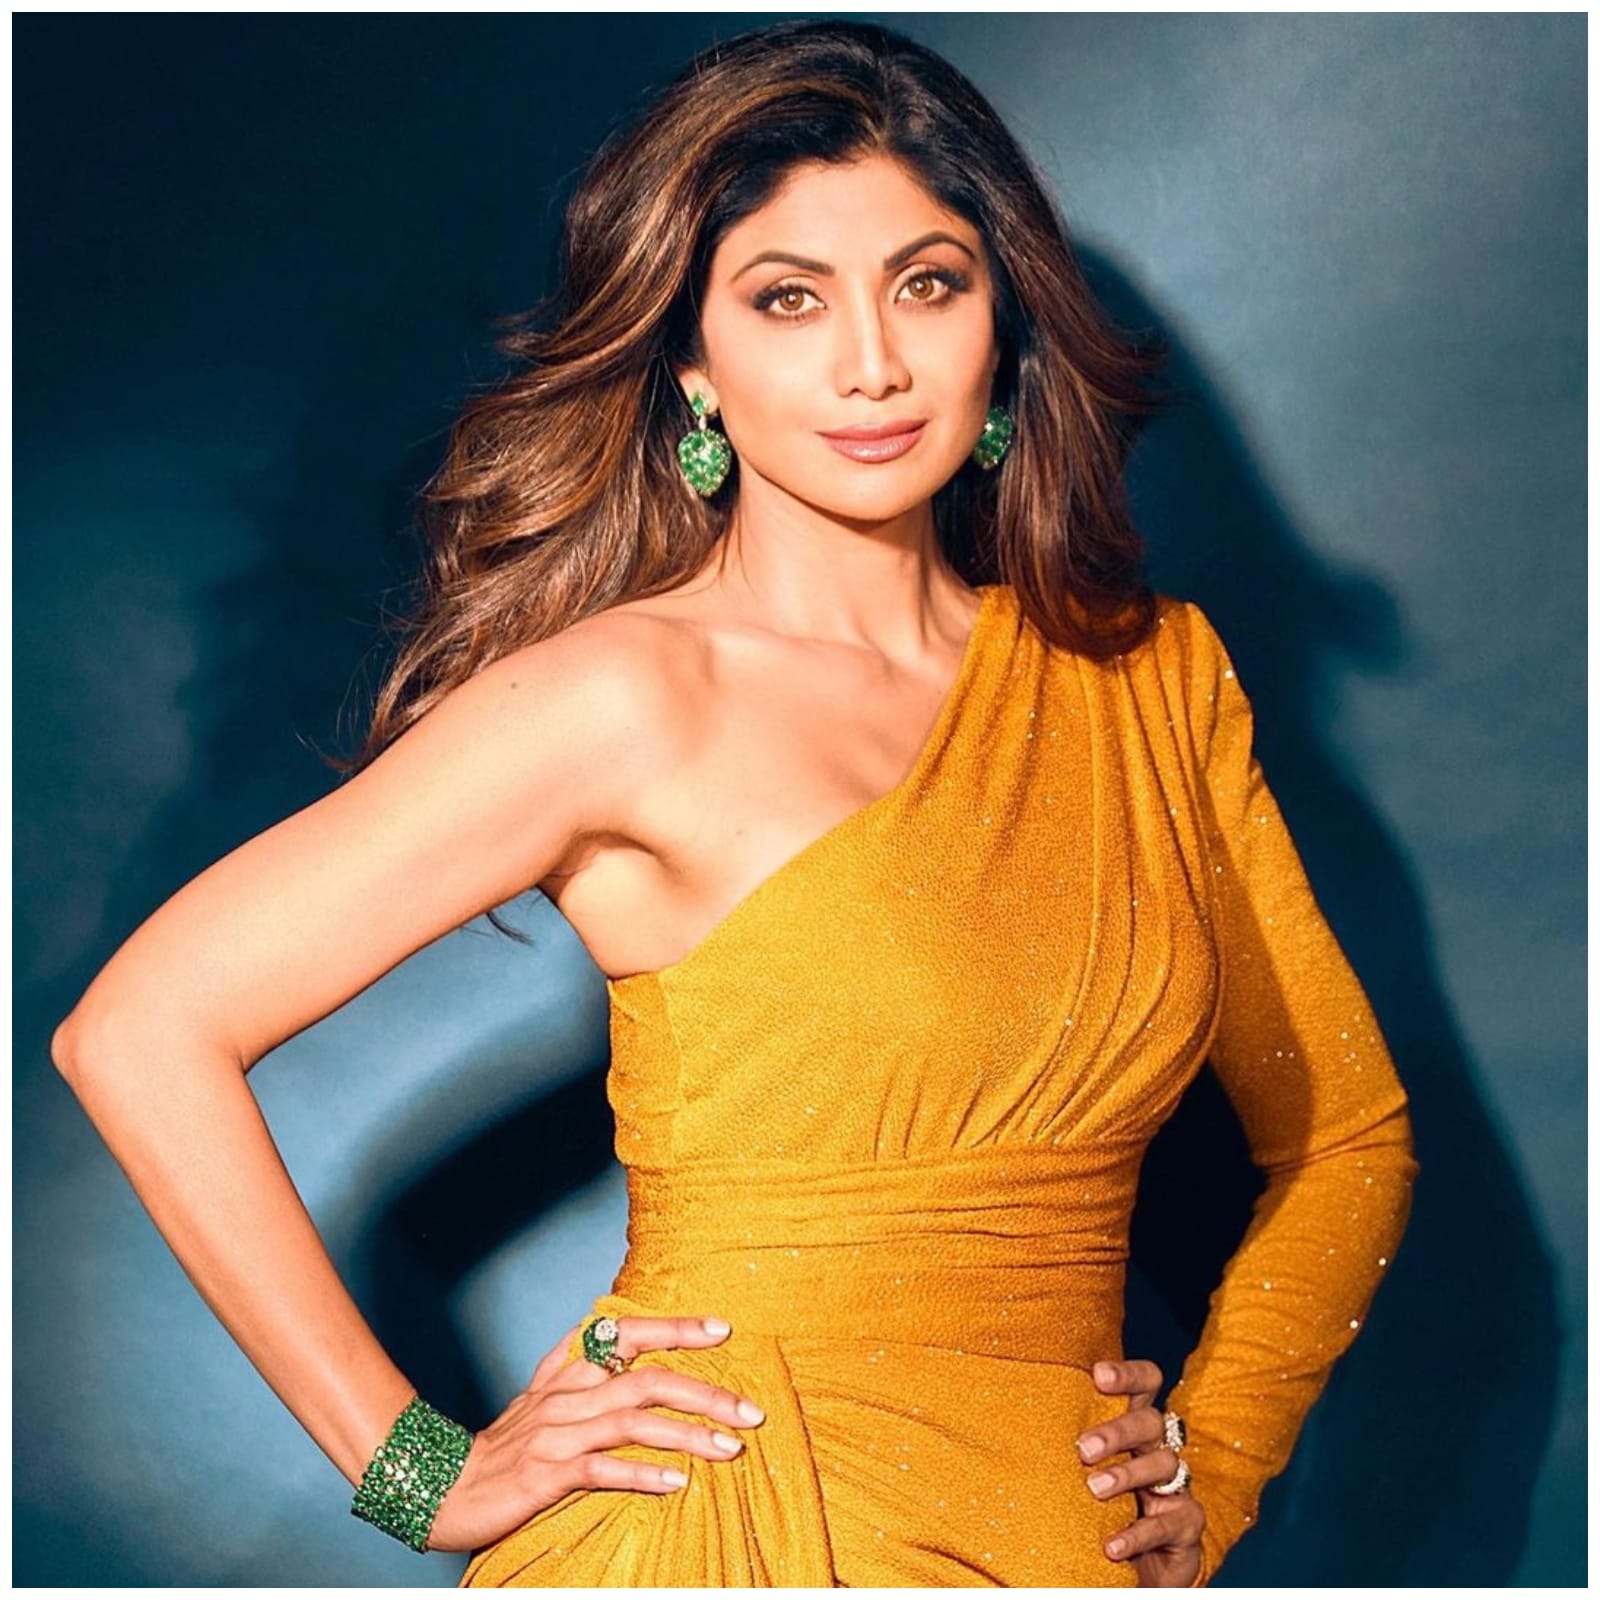 Shilpa Shetty Sex Videos - Bollywood Rallies Behind Shilpa Shetty as She Breaks Silence on Raj Kundra  Case, Requests for Privacy